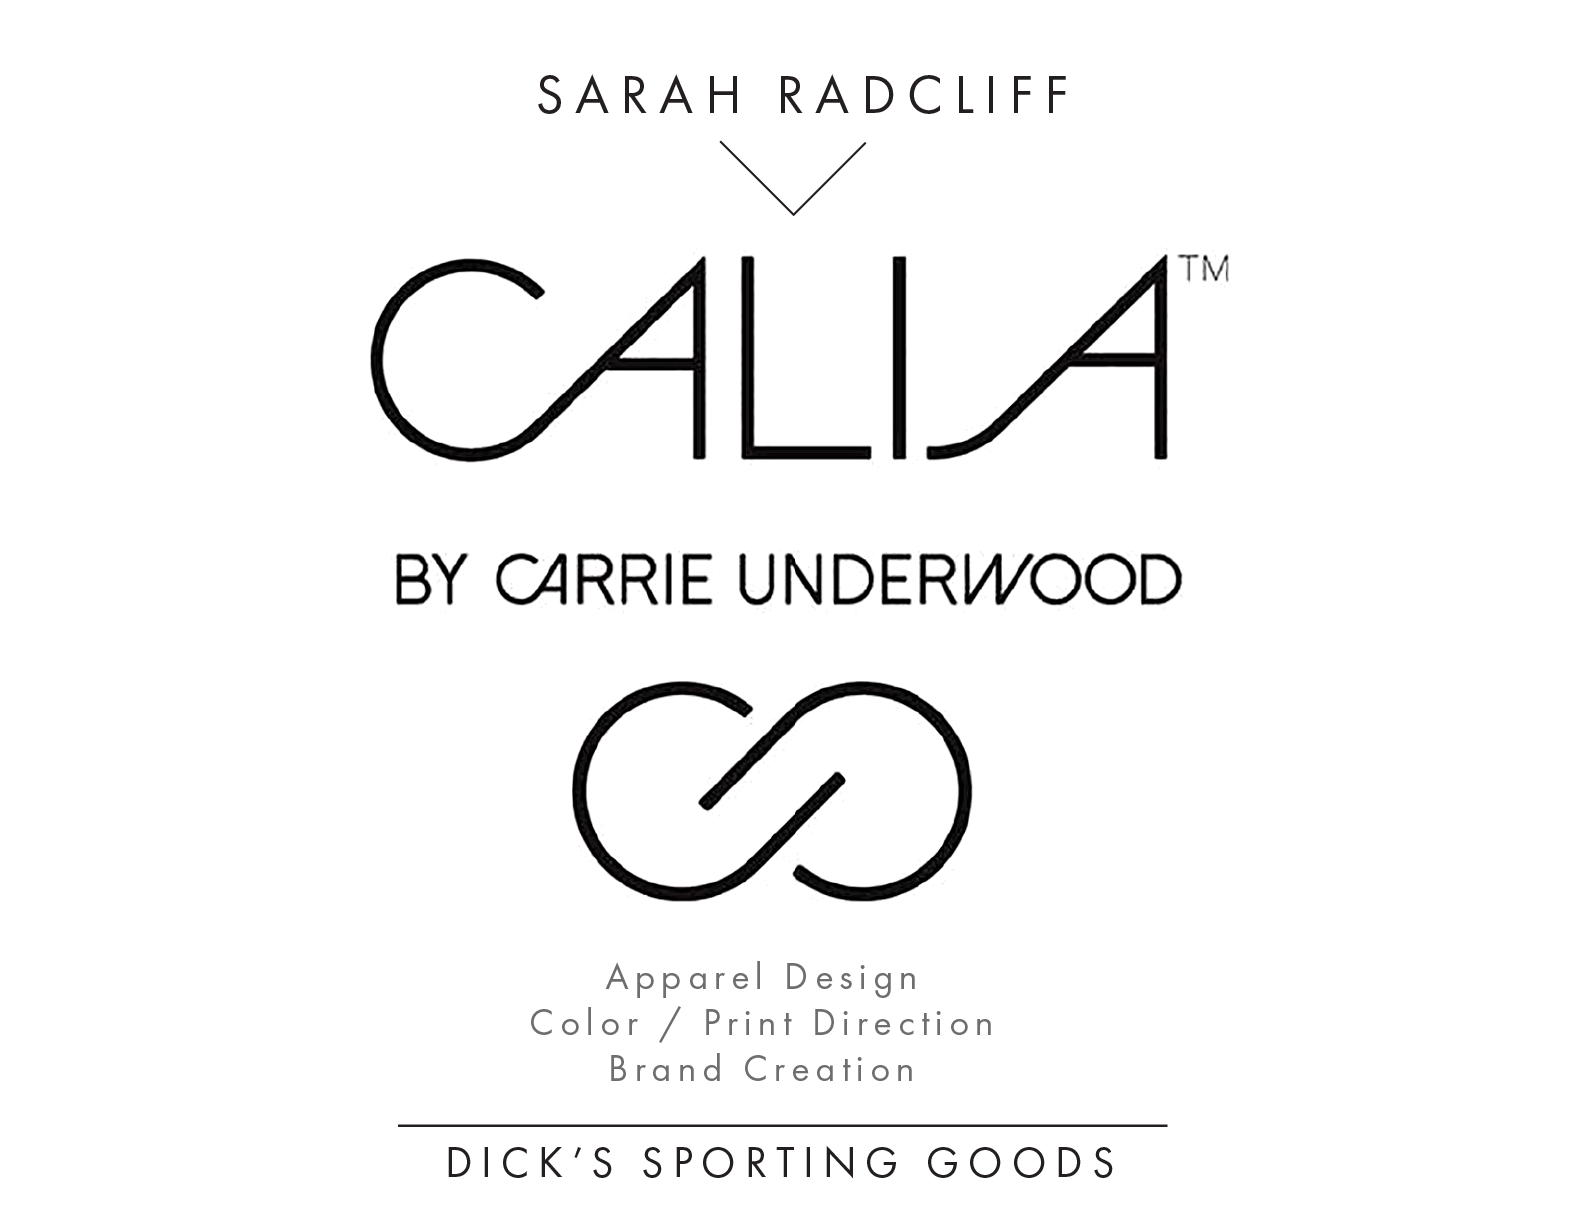 sarah radcliff - CALIA by Carrie Underwood - Dick's Sporting Goods